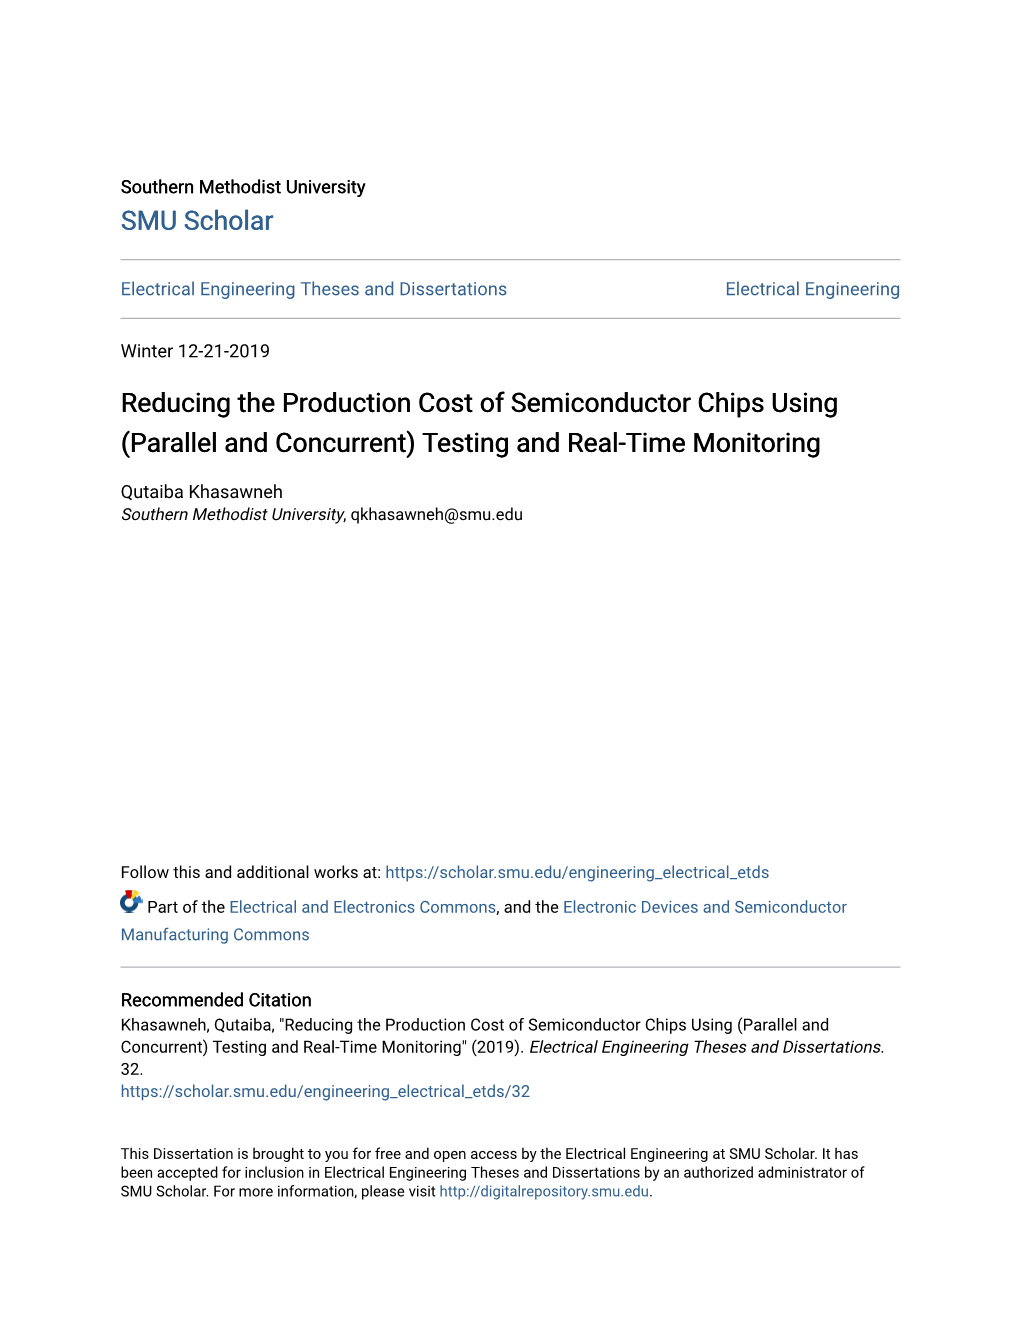 Reducing the Production Cost of Semiconductor Chips Using (Parallel and Concurrent) Testing and Real-Time Monitoring